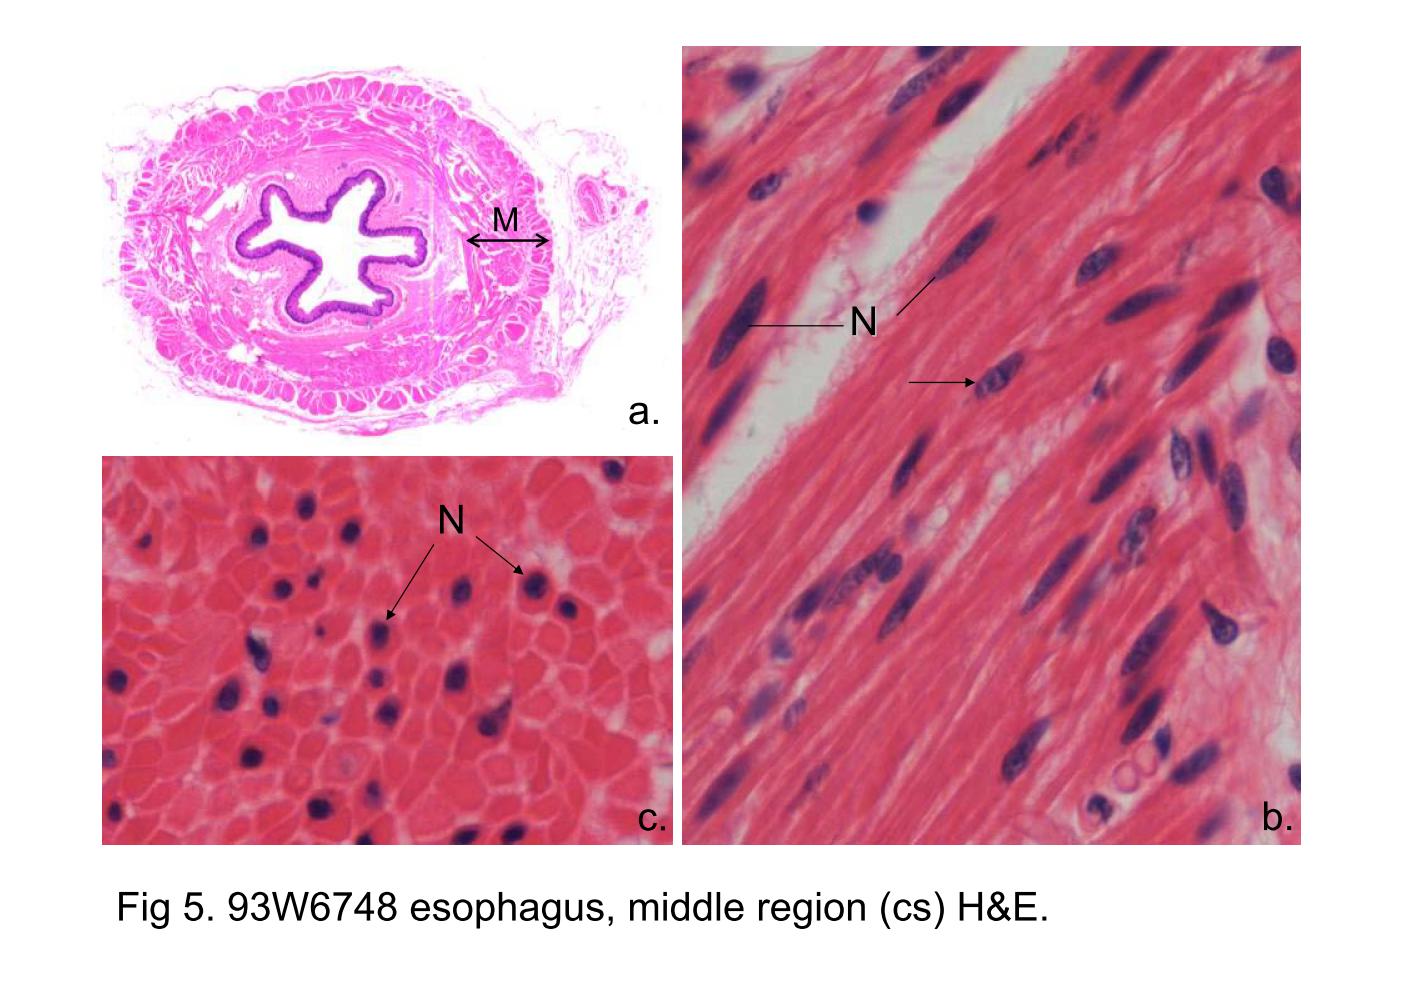 block6-2_13.jpg - Fig 5. 93W6748 esophagus, middle region (cs) H&E.Fig 5a. The muscularis externa (M) of the middle portion of theesophagus is composed of smooth muscle and skeletal muscle.The muscle fibers are arranged into two layers (inner circular &outer longitudinal).Smooth muscle cells is spindle-shaped in the longitudinalsection (Fig 5b). Their nuclei (N) are also elongated andconform to the general shape of the cell. A nuclei display slightlytwisted is indicated by an arrow, like a corkscrew; this ischaracteristic of contracted cells.Fig 5c shows a cross-sectioned of the smooth muscle cells,displaying circular or polygonal profiles with variations on size.In most of the cells, the nuclei (N) have not been included in thesection, and only the eosinophilic cytoplasm appears.